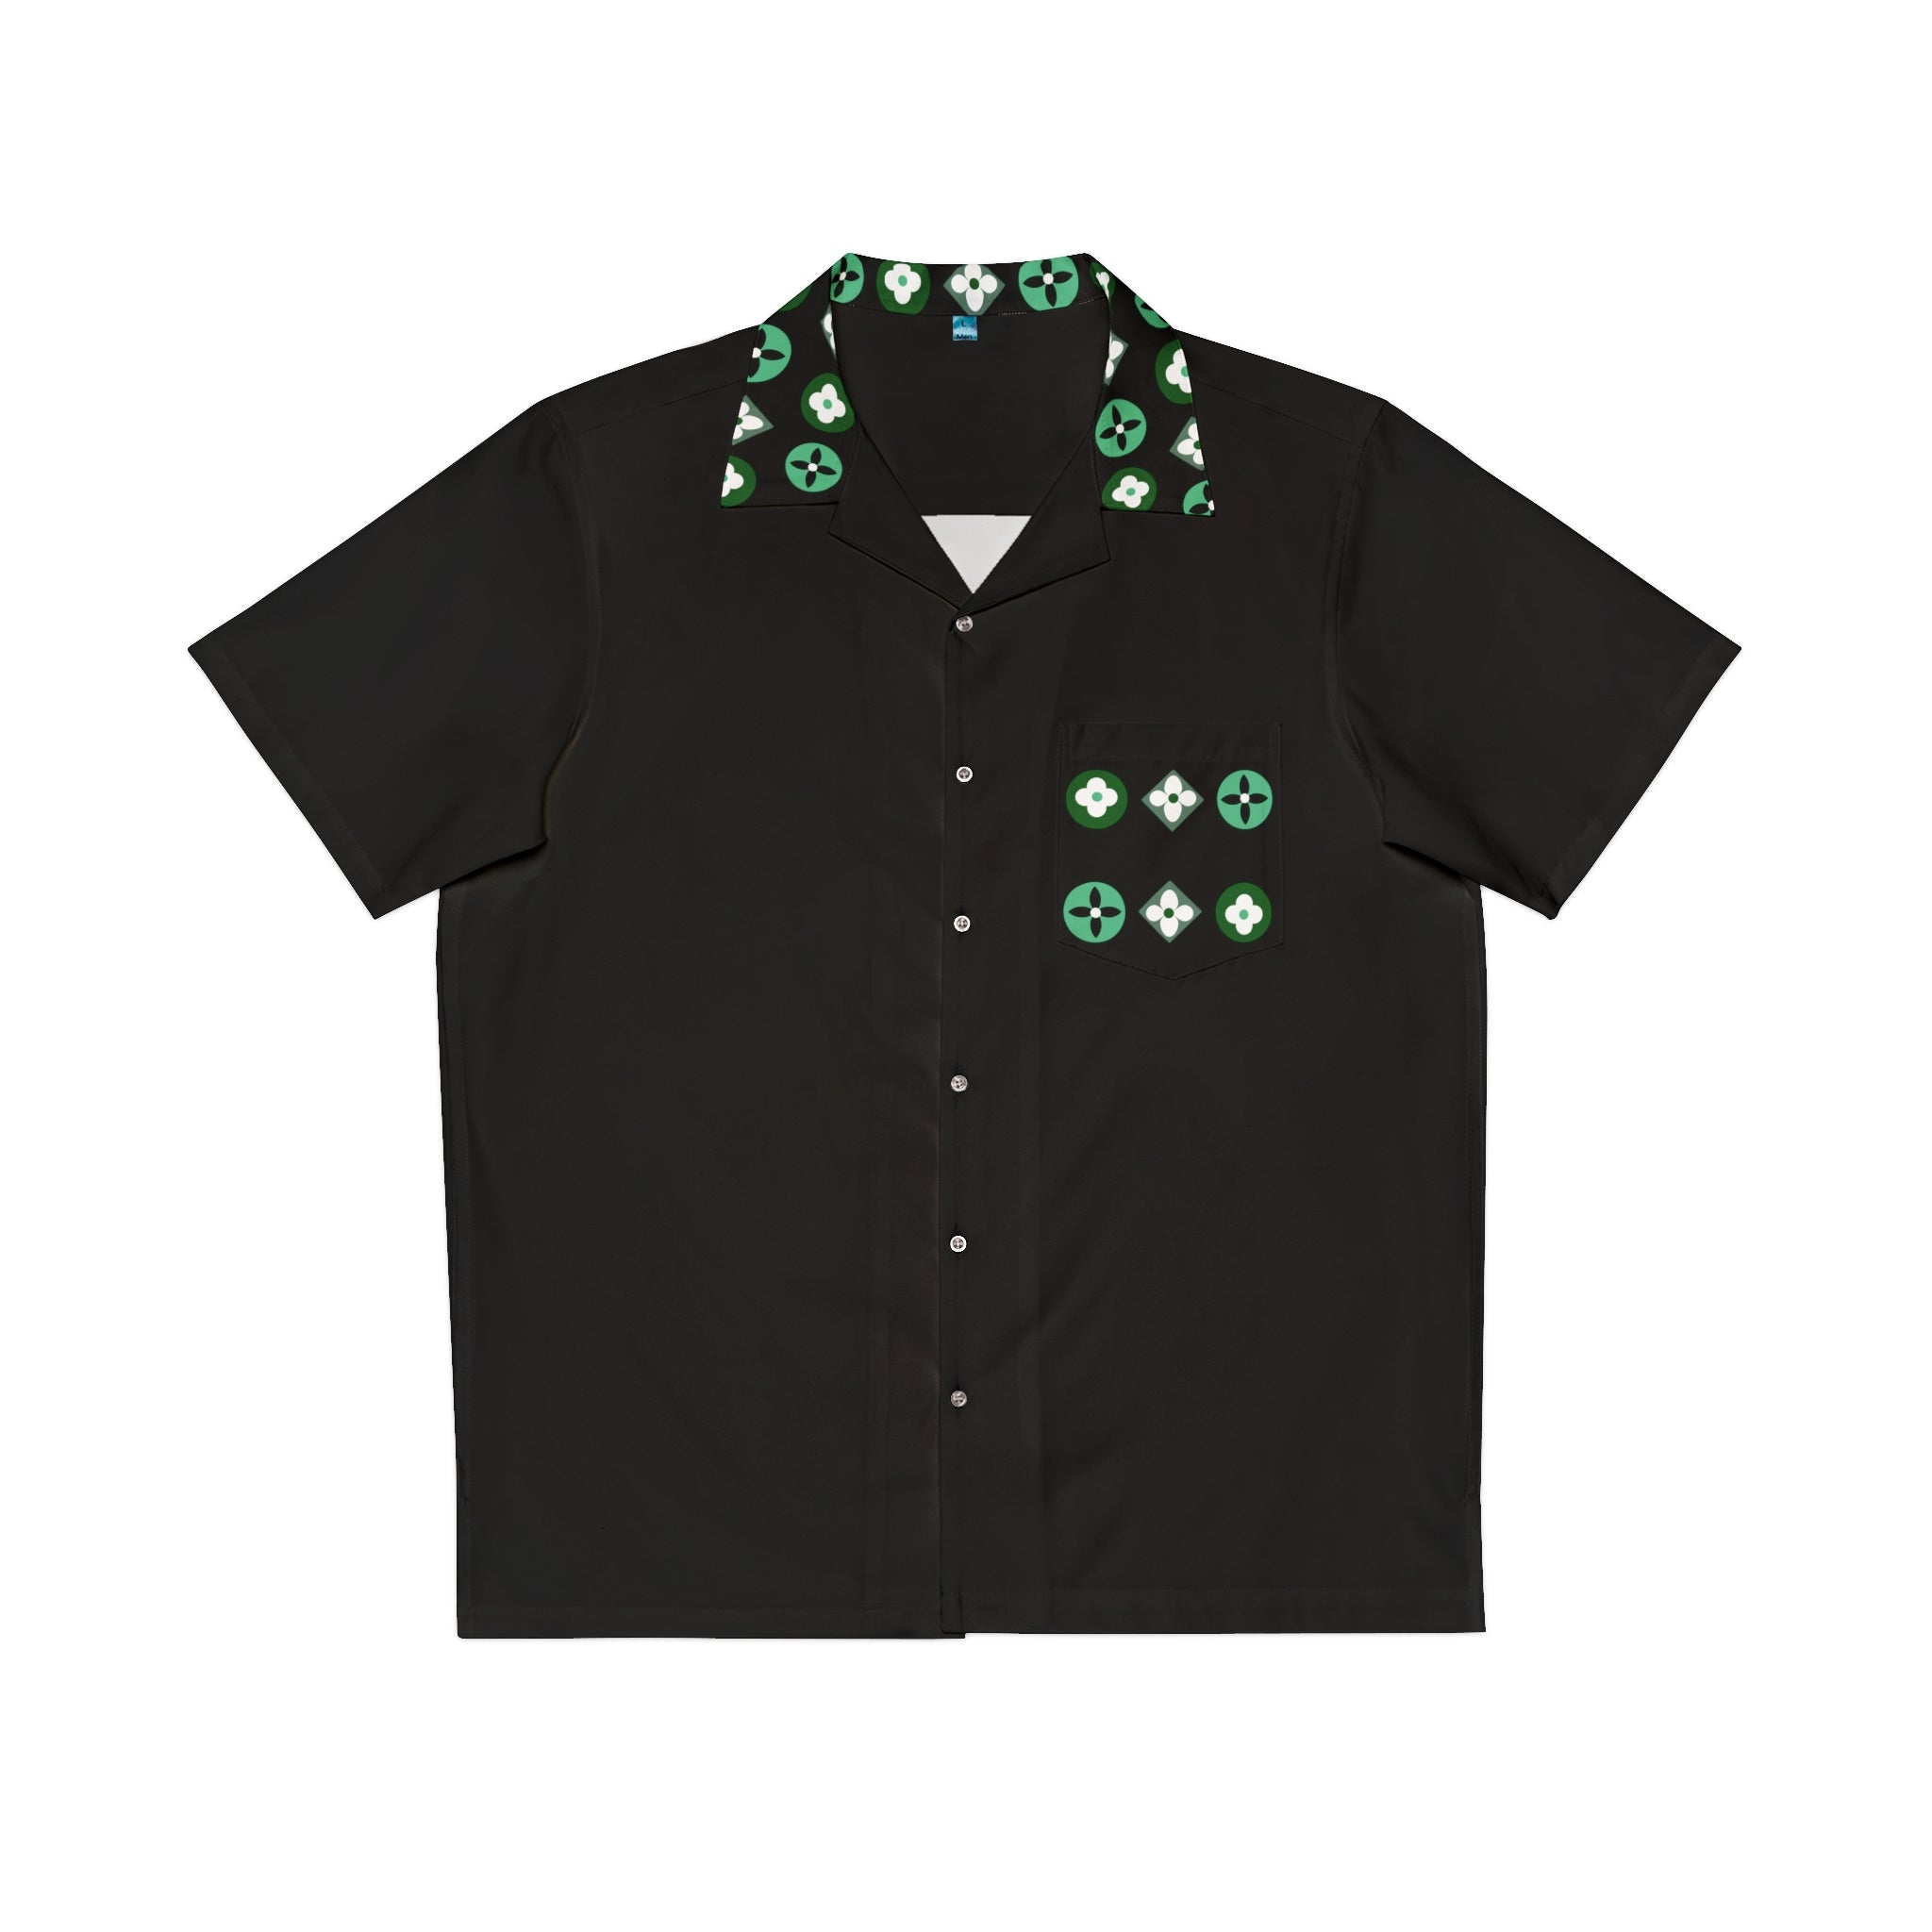  Groove Collection Trilogy of Icons Pocket Grid (Greens) Black Unisex Gender Neutral Button Up Shirt, Hawaiian Shirt All Over Prints5XLWhite